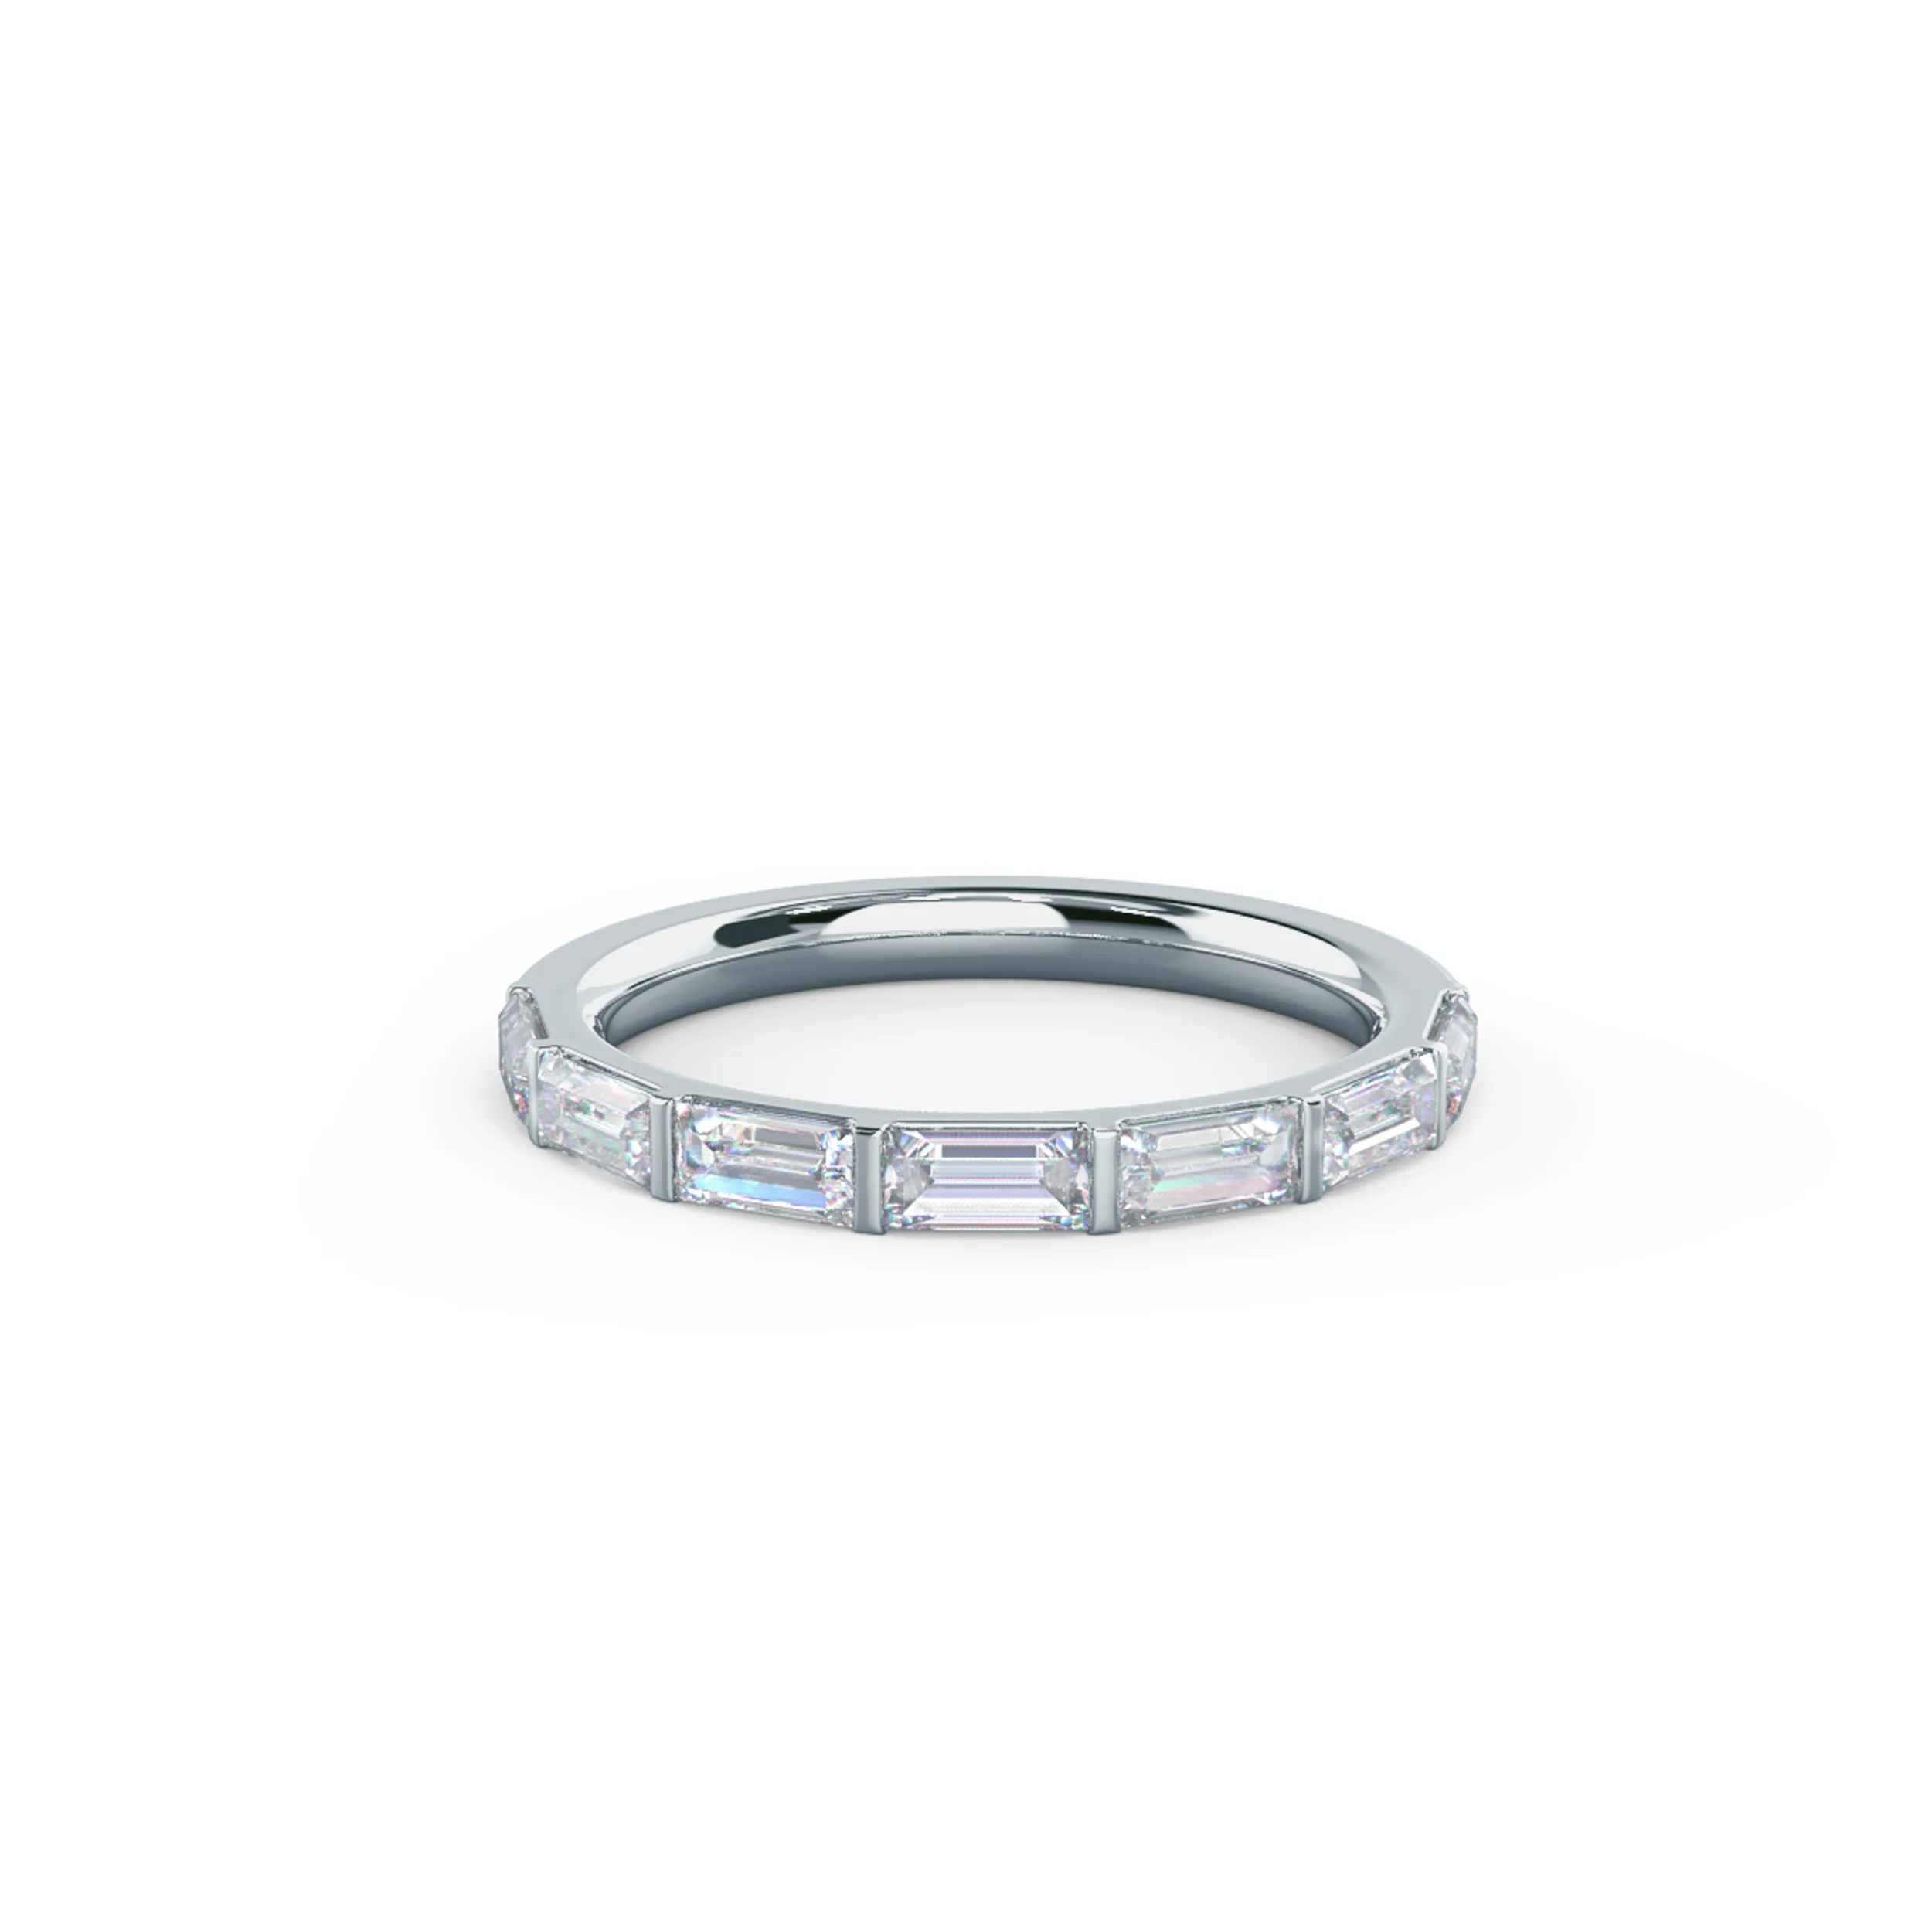 0.7 Carat Diamonds Baguette East-West Half Band in 18k White Gold (Main View)